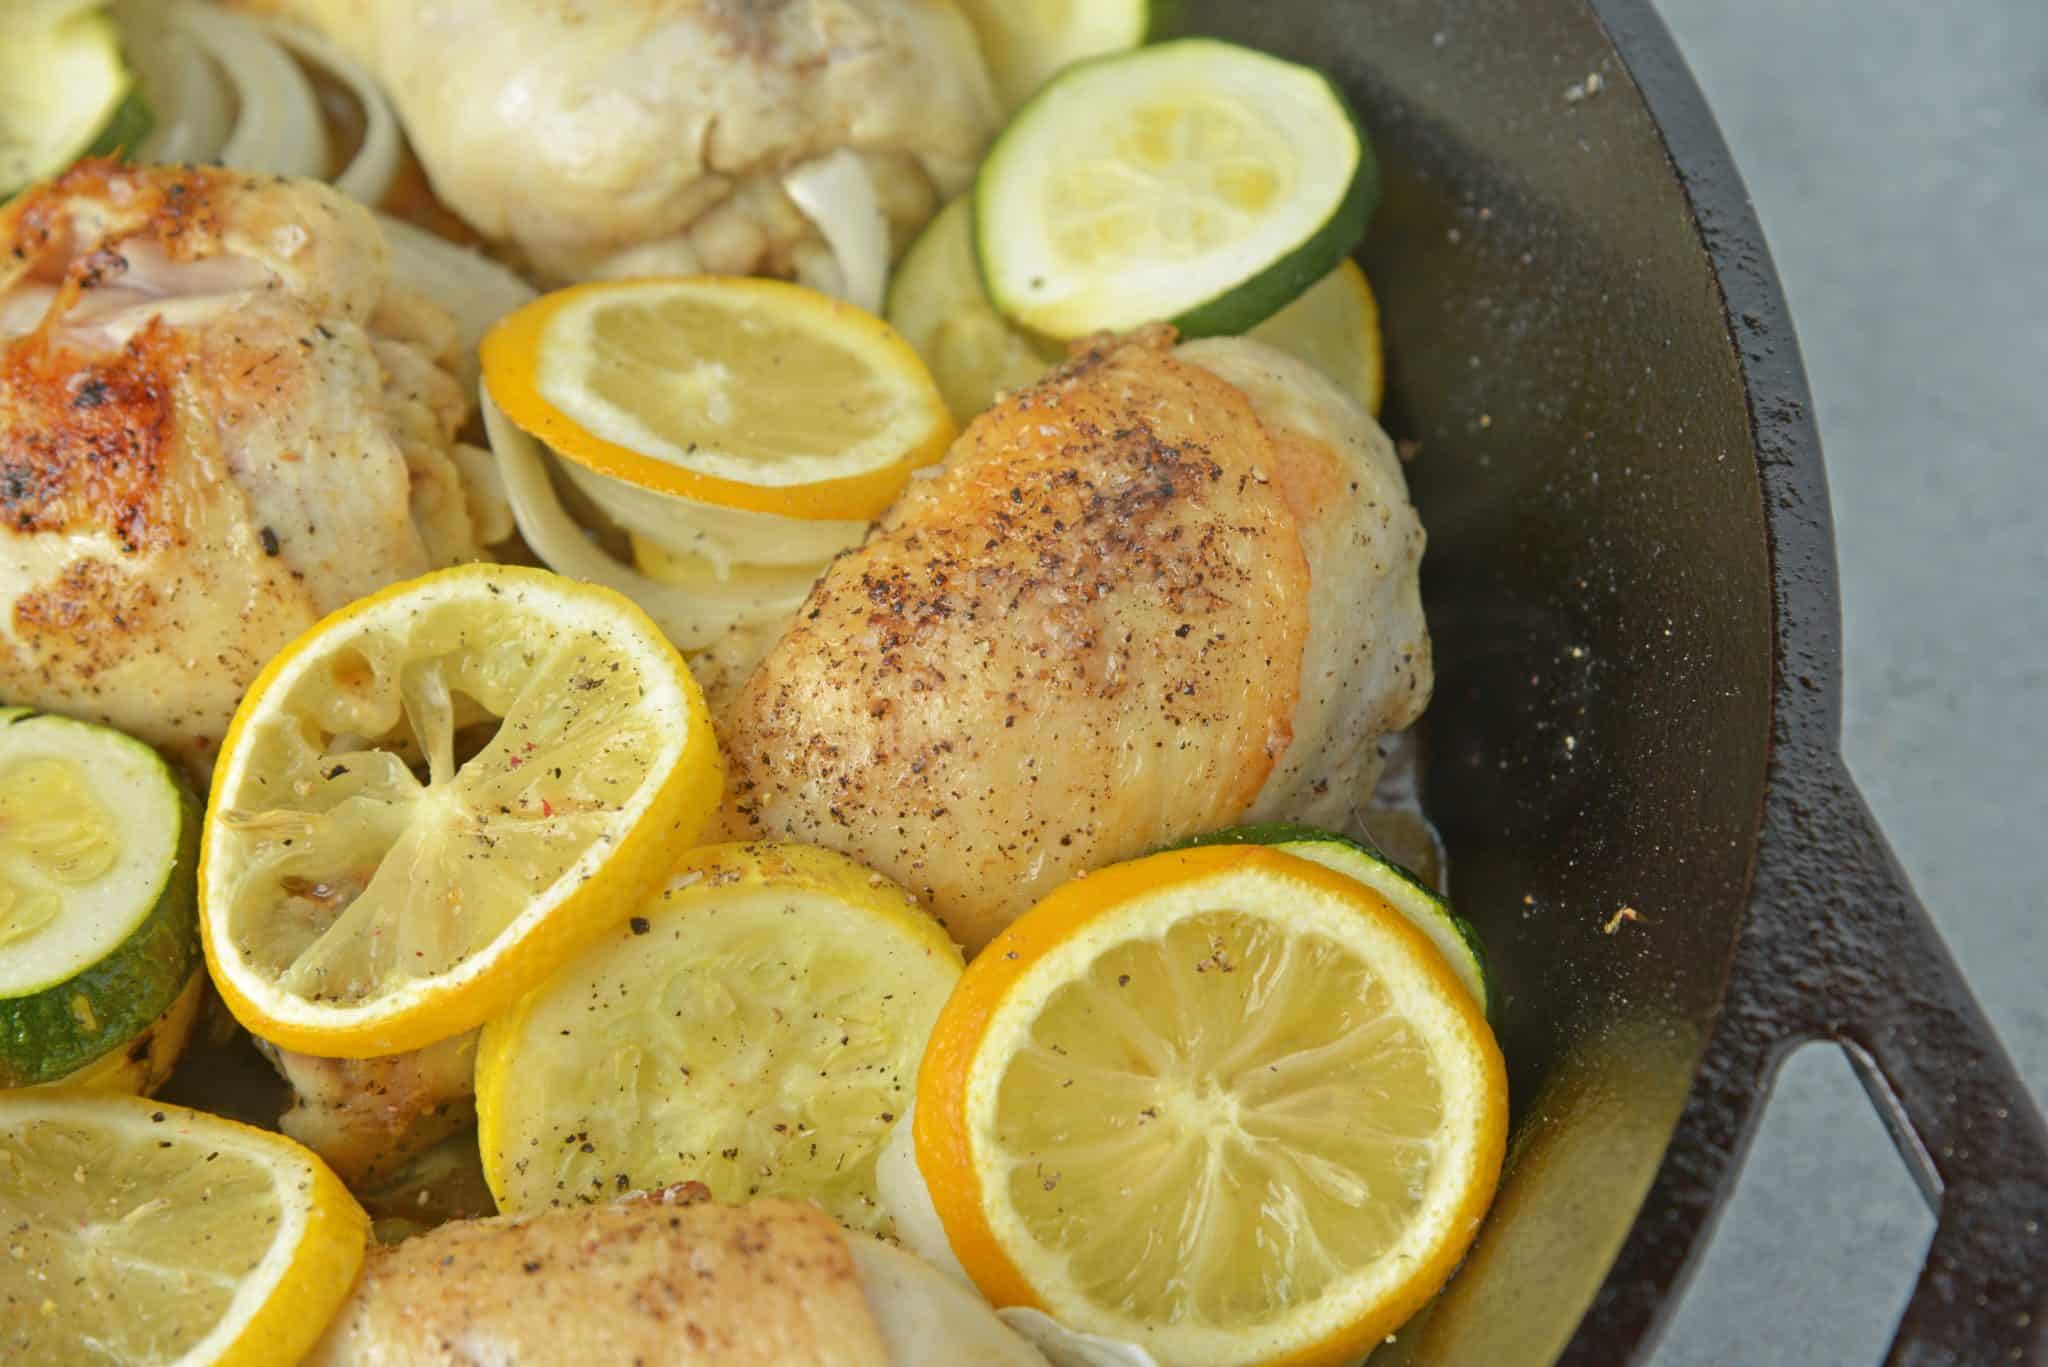 Lemon Chicken with Zucchini is a meal with classic, all-American flavors. Cast iron recipes are great since everything gets cooked in the same pan! #lemonchickenrecipe #castironrecipes www.savoryexperiments.com